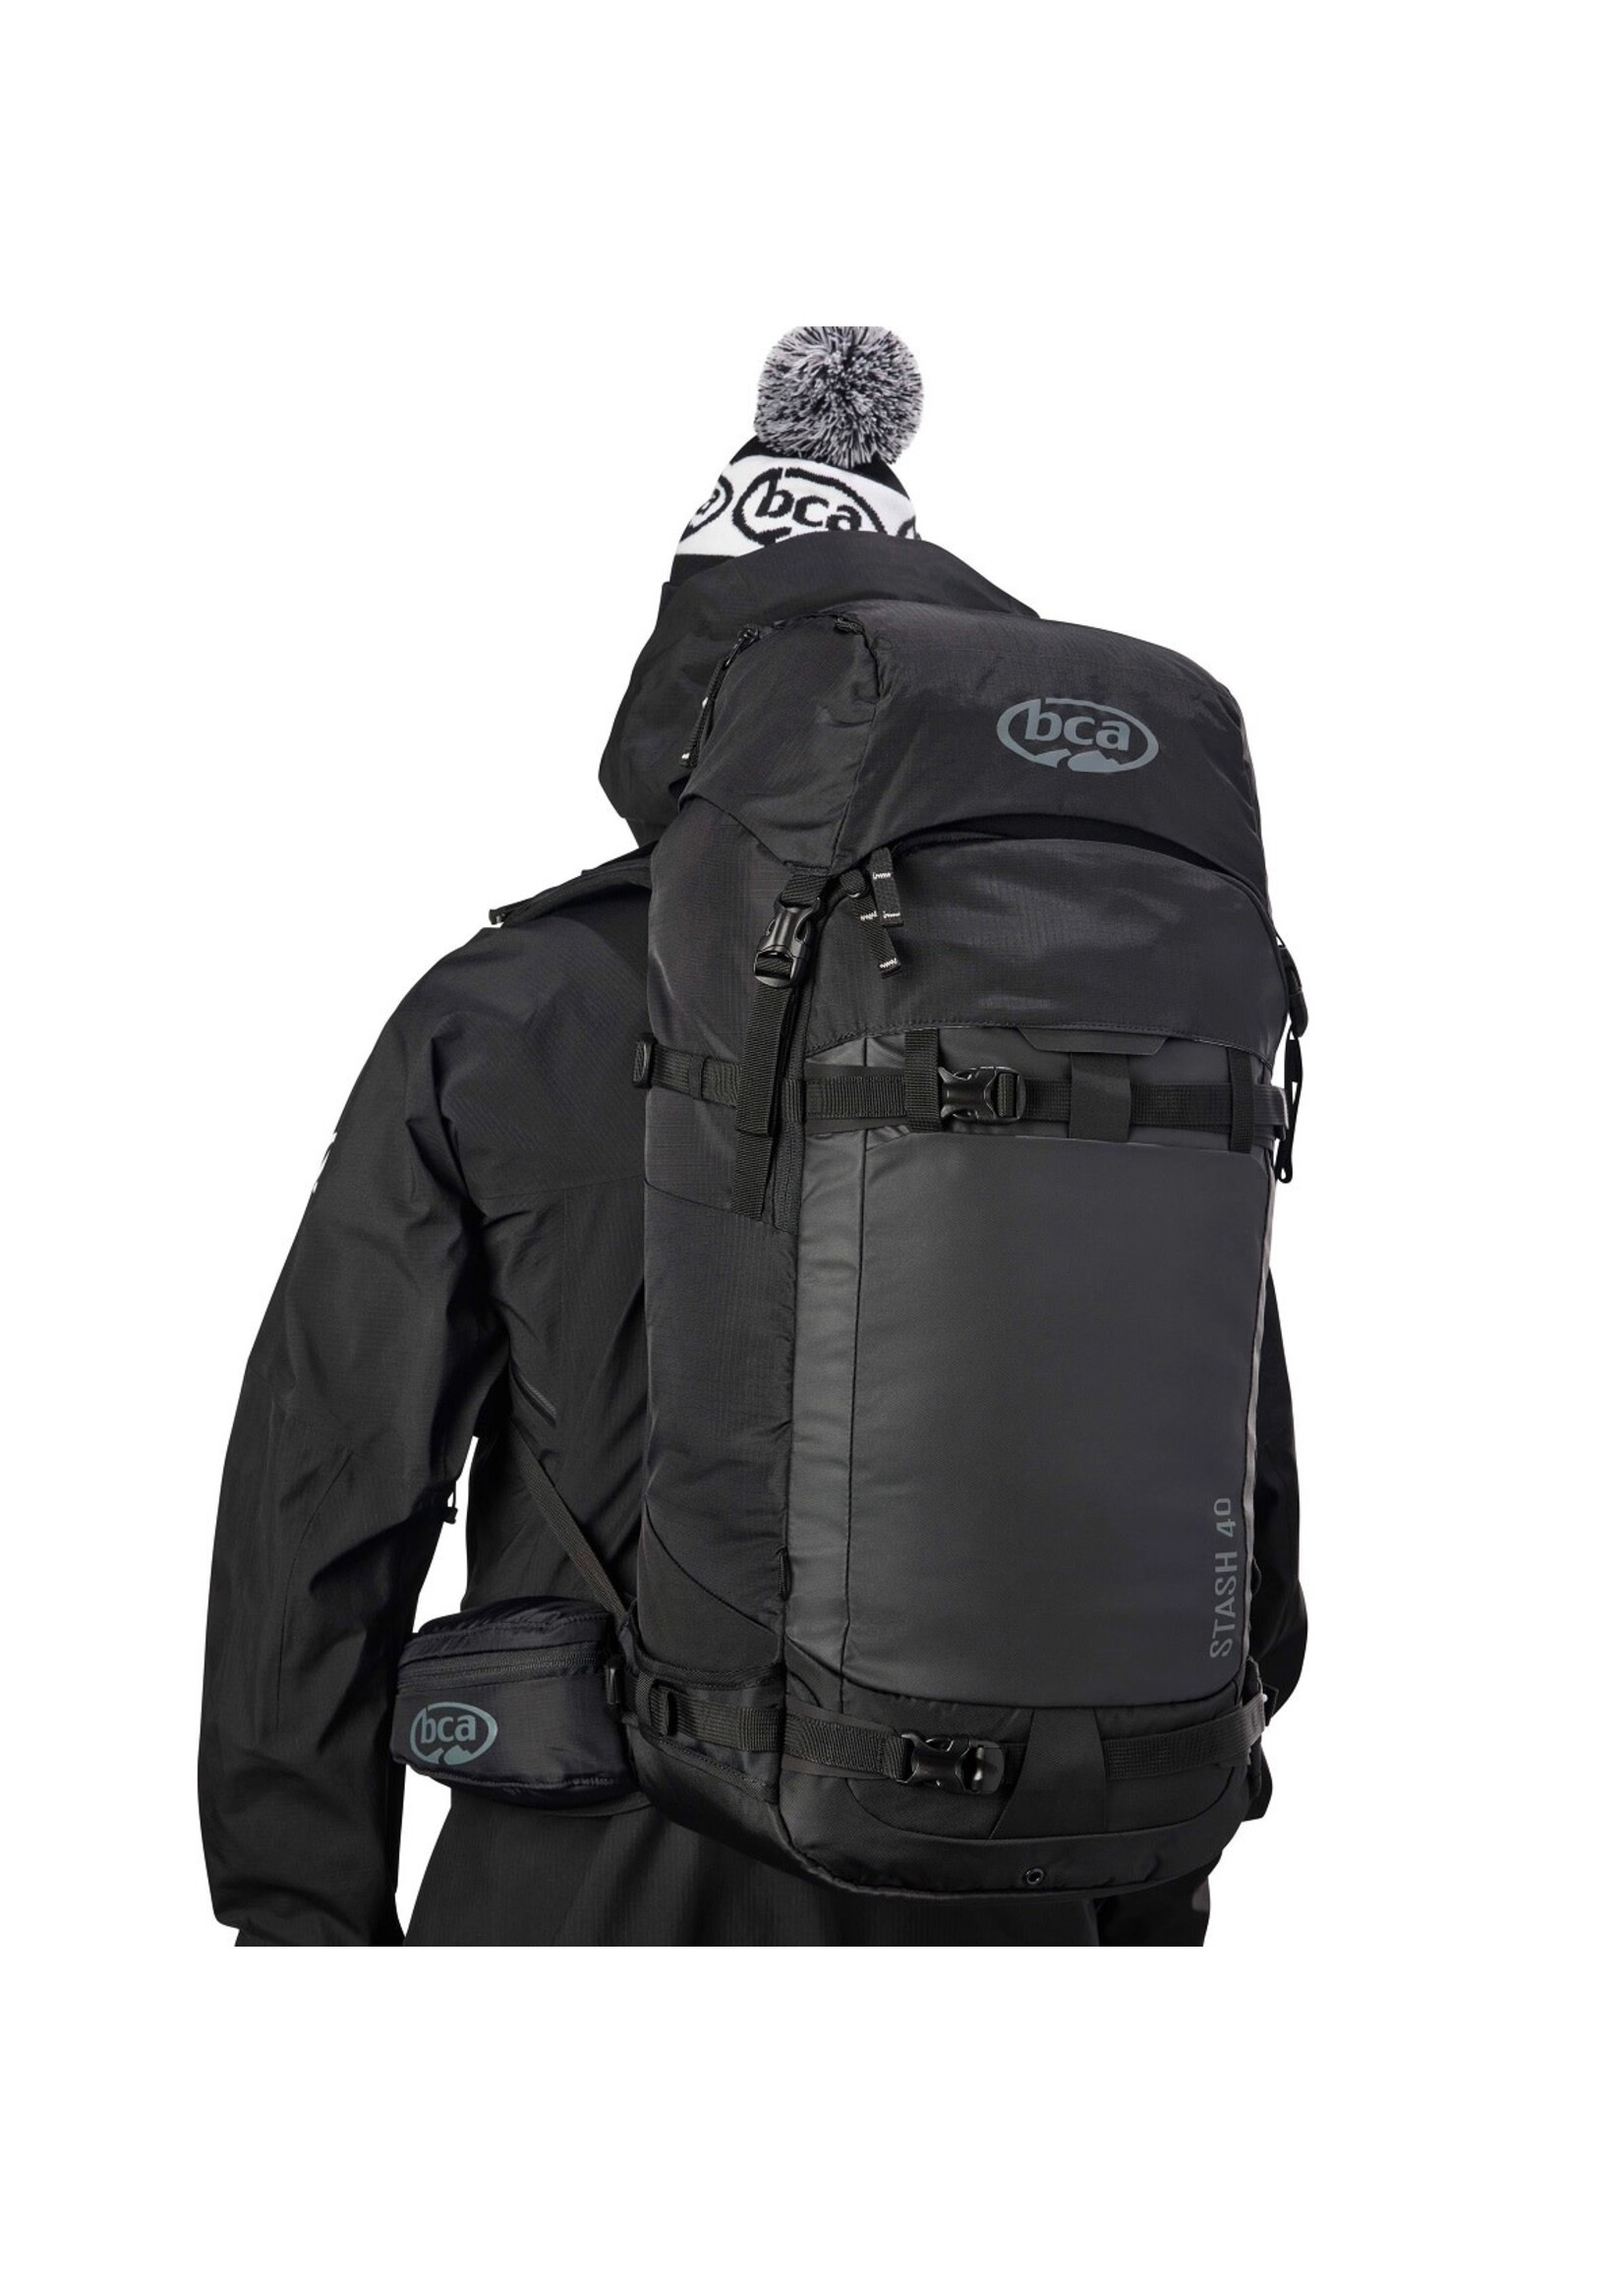 Backcountry Access BCA  Stash 40 Pack